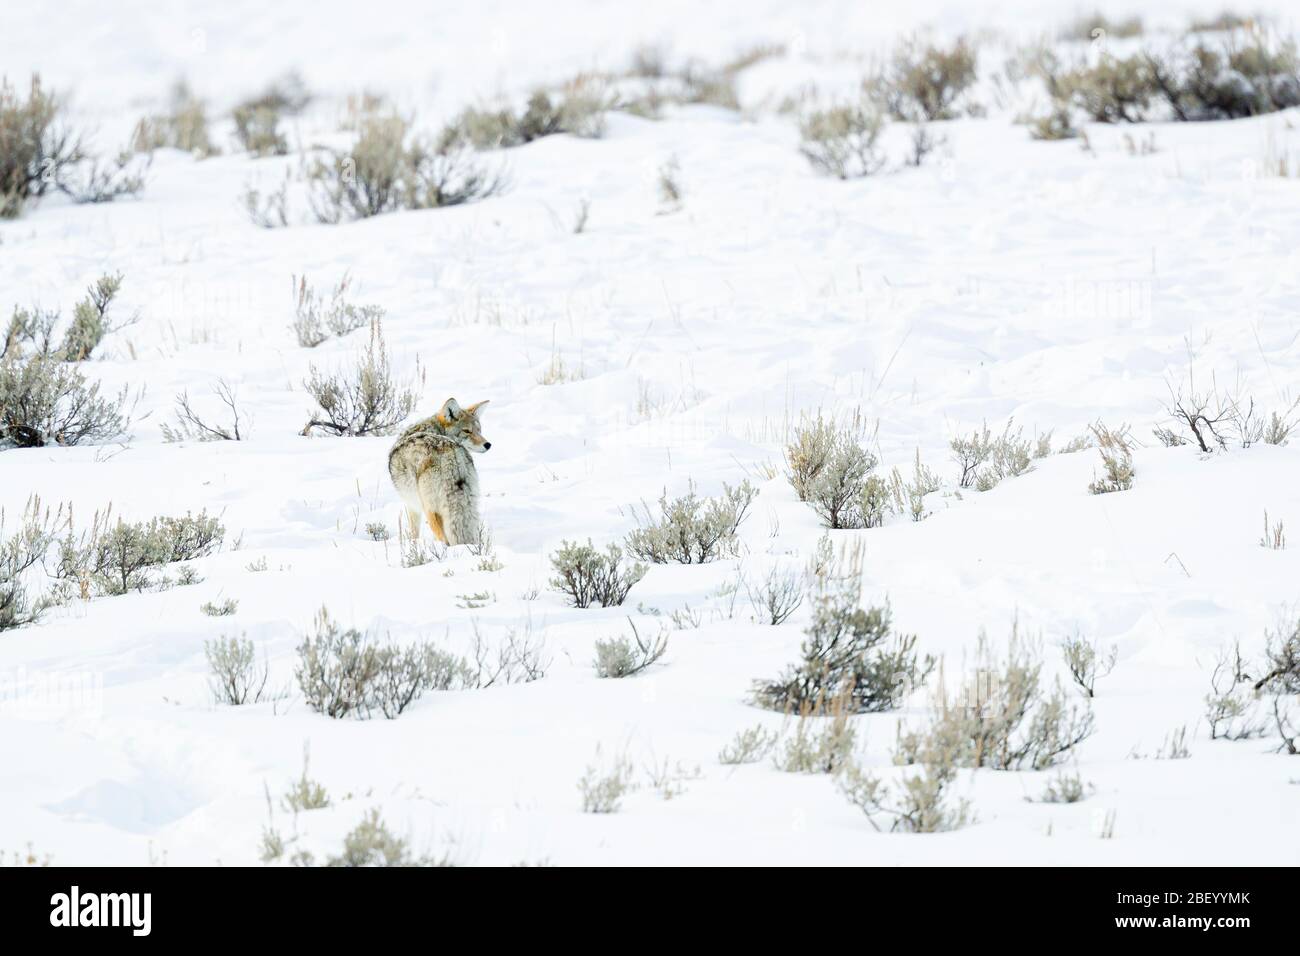 Coyote in Yellowstone National Park USA Stock Photo